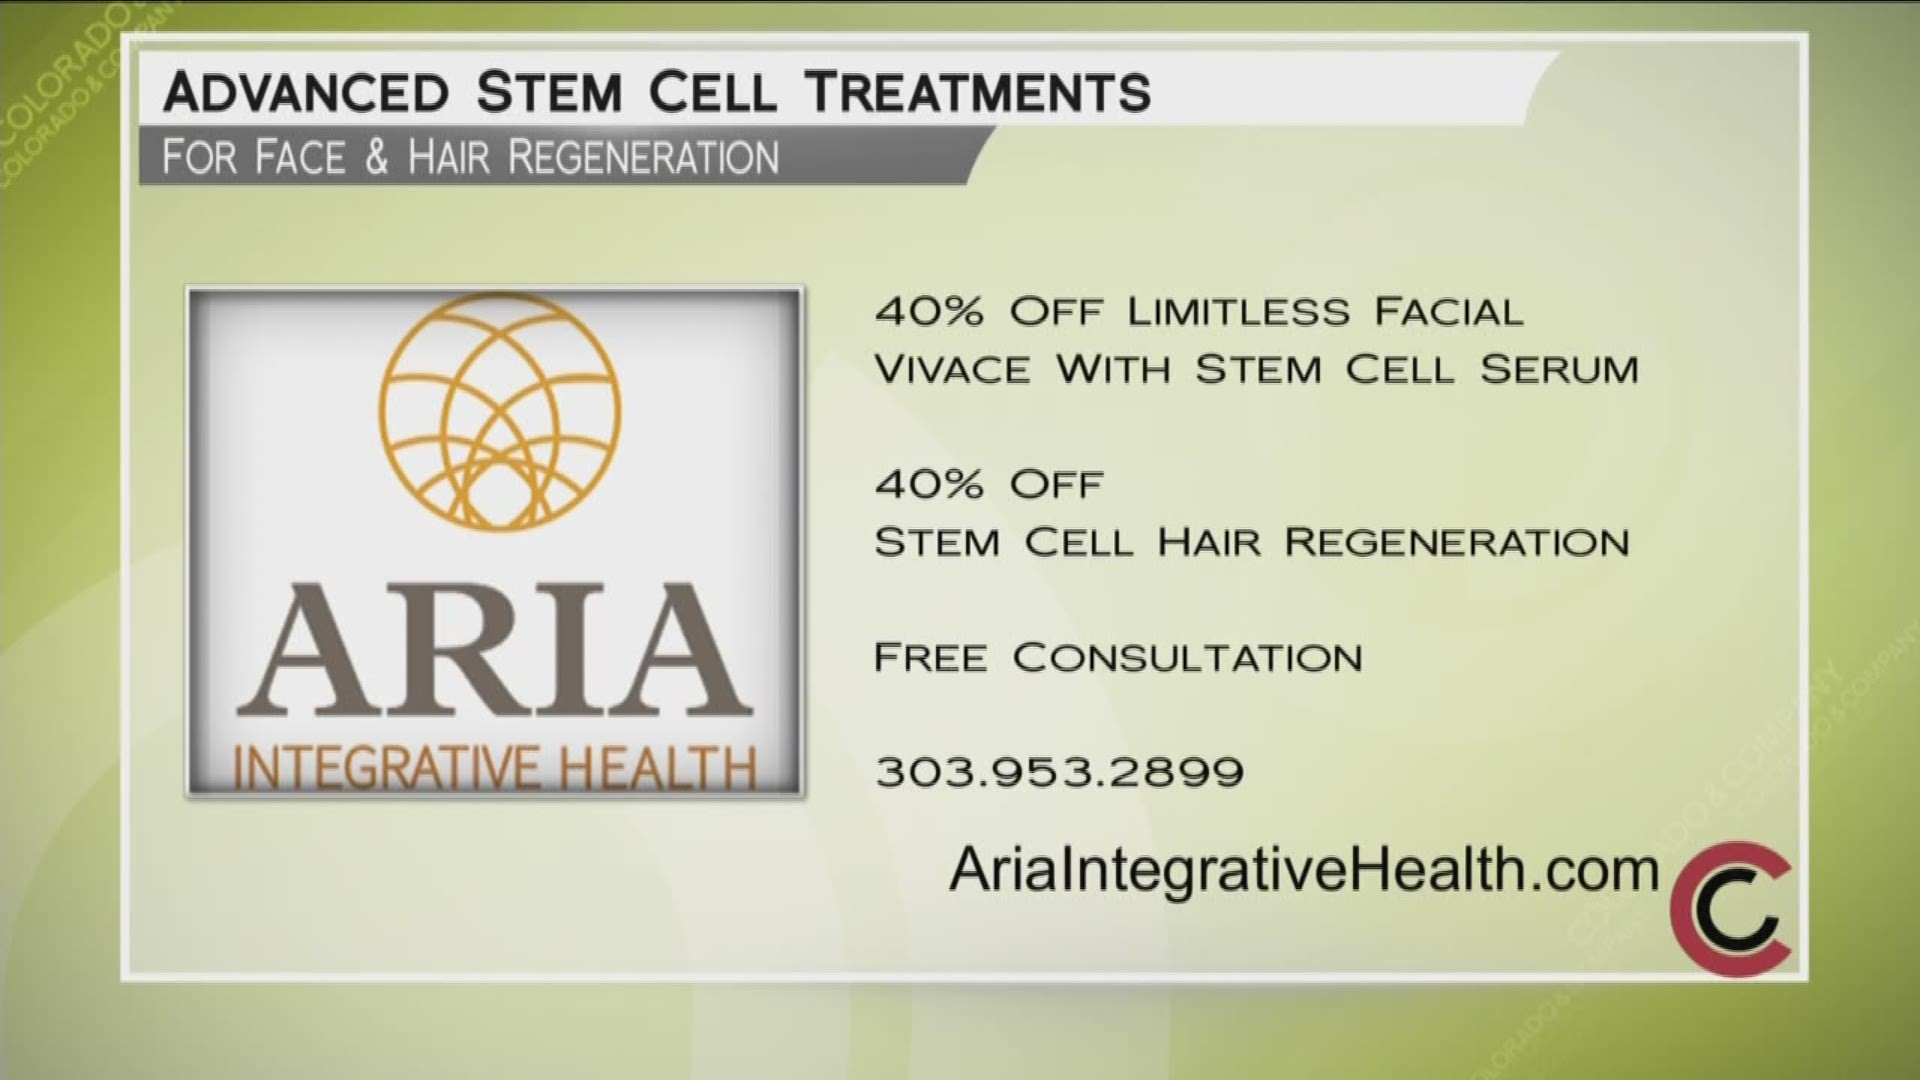 The newest advancements in stem cell treatments are at Aria Integrative Health. The Limitless Facial using Vivace and stem cell serum is at an amazing 40% off! Stem cell hair regeneration treatments are 40% off, as well! Call for your free consultation—303.953.2899. For a full menu of services, visit www.AriaIntegrativeHealth.com. 
THIS INTERVIEW HAS COMMERCIAL CONTENT. PRODUCTS AND SERVICES FEATURED APPEAR AS PAID ADVERTISING.